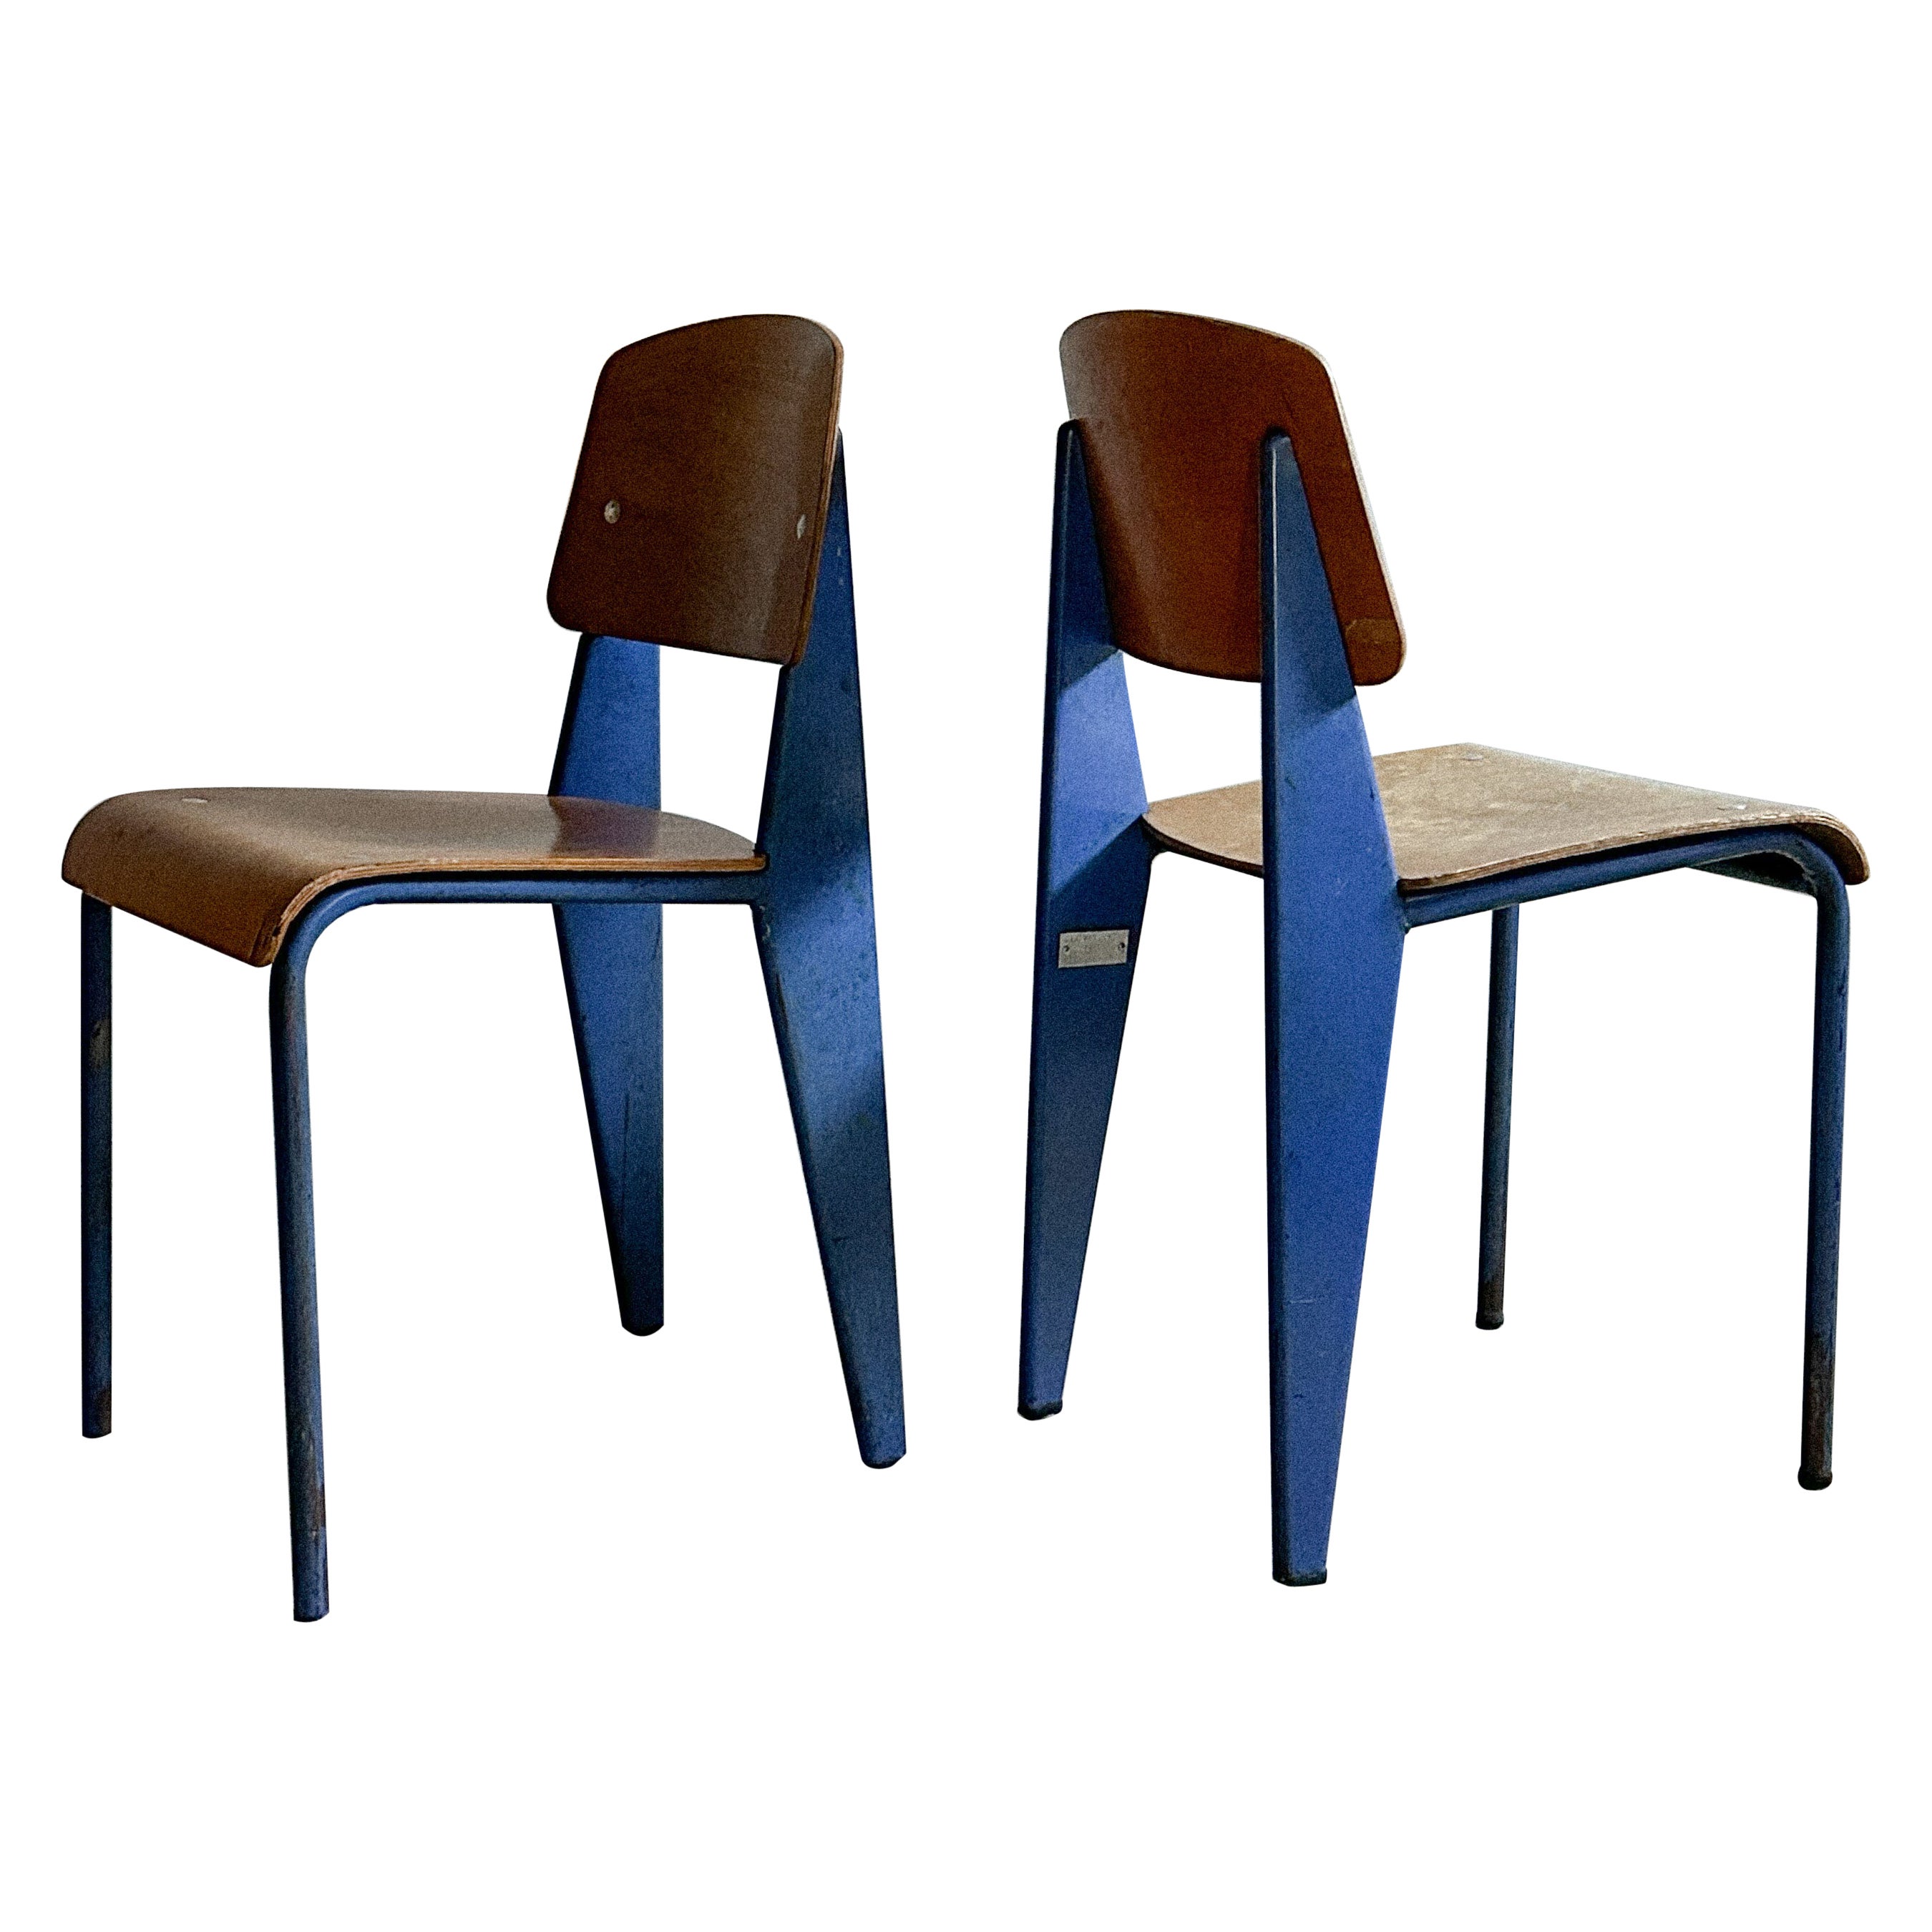 Pair of Jean Prouvé "Standard Chair" model 305, from the CEA, Marcoule, c. 1954